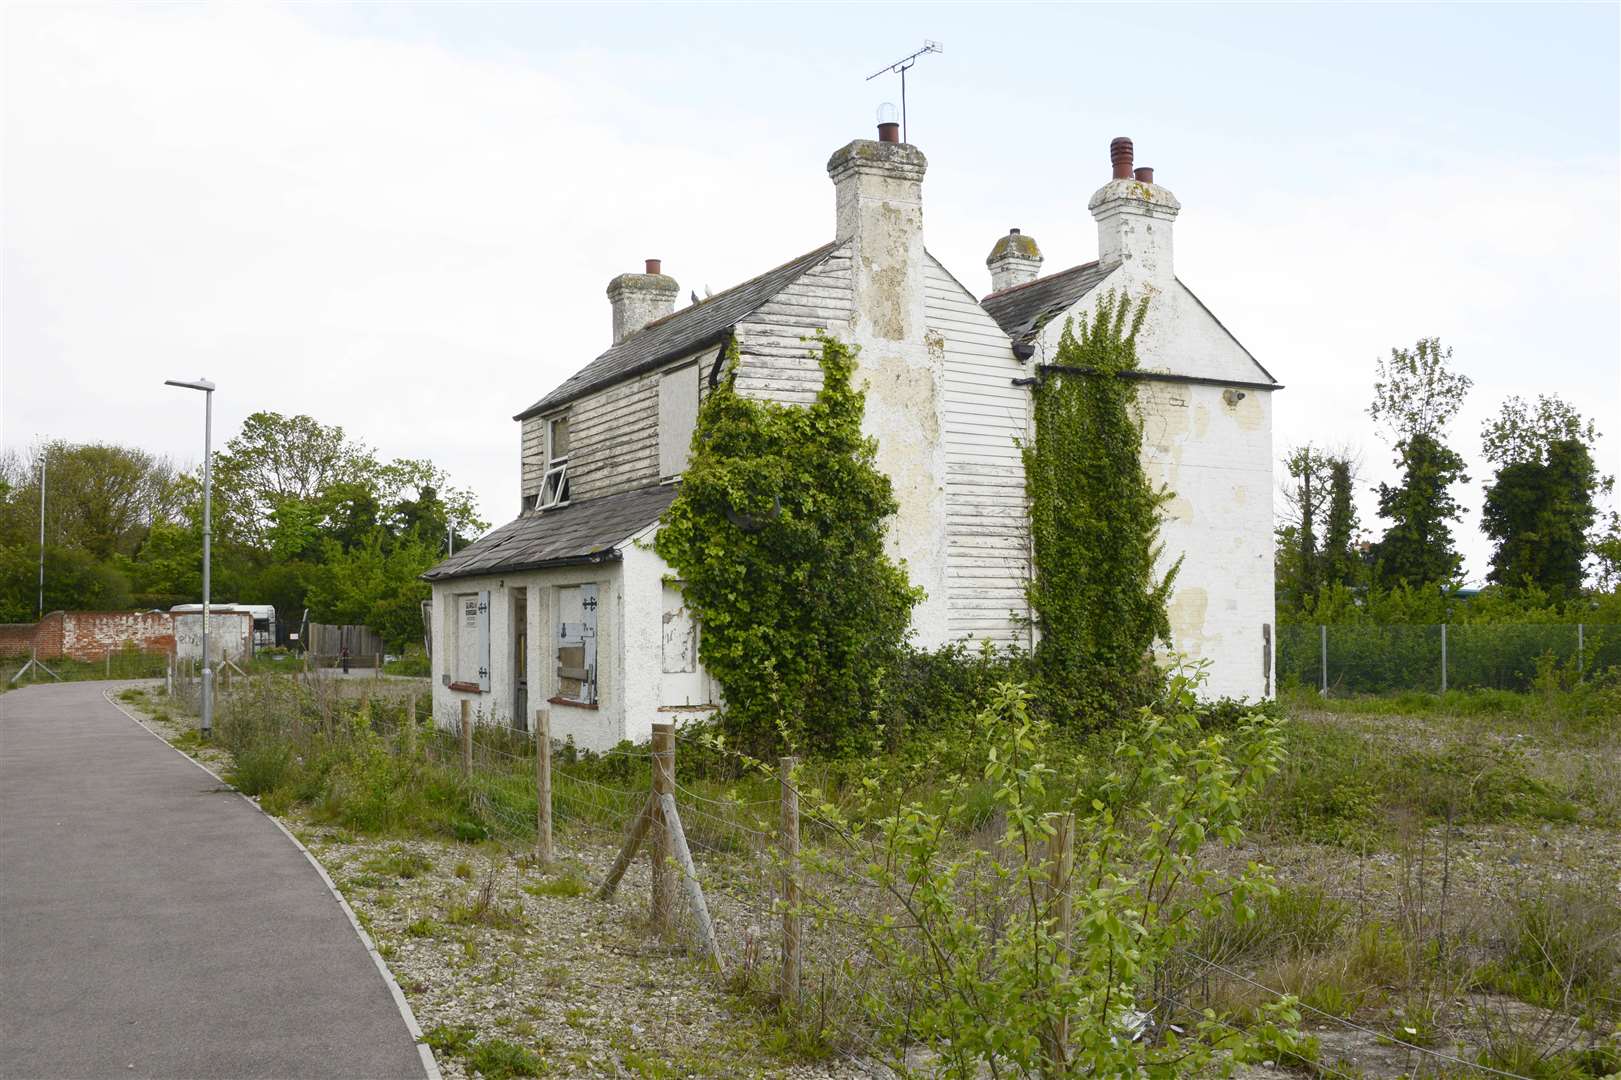 Ian Morris is calling for something to be done about two derelict buildings near Blacksole Bridge